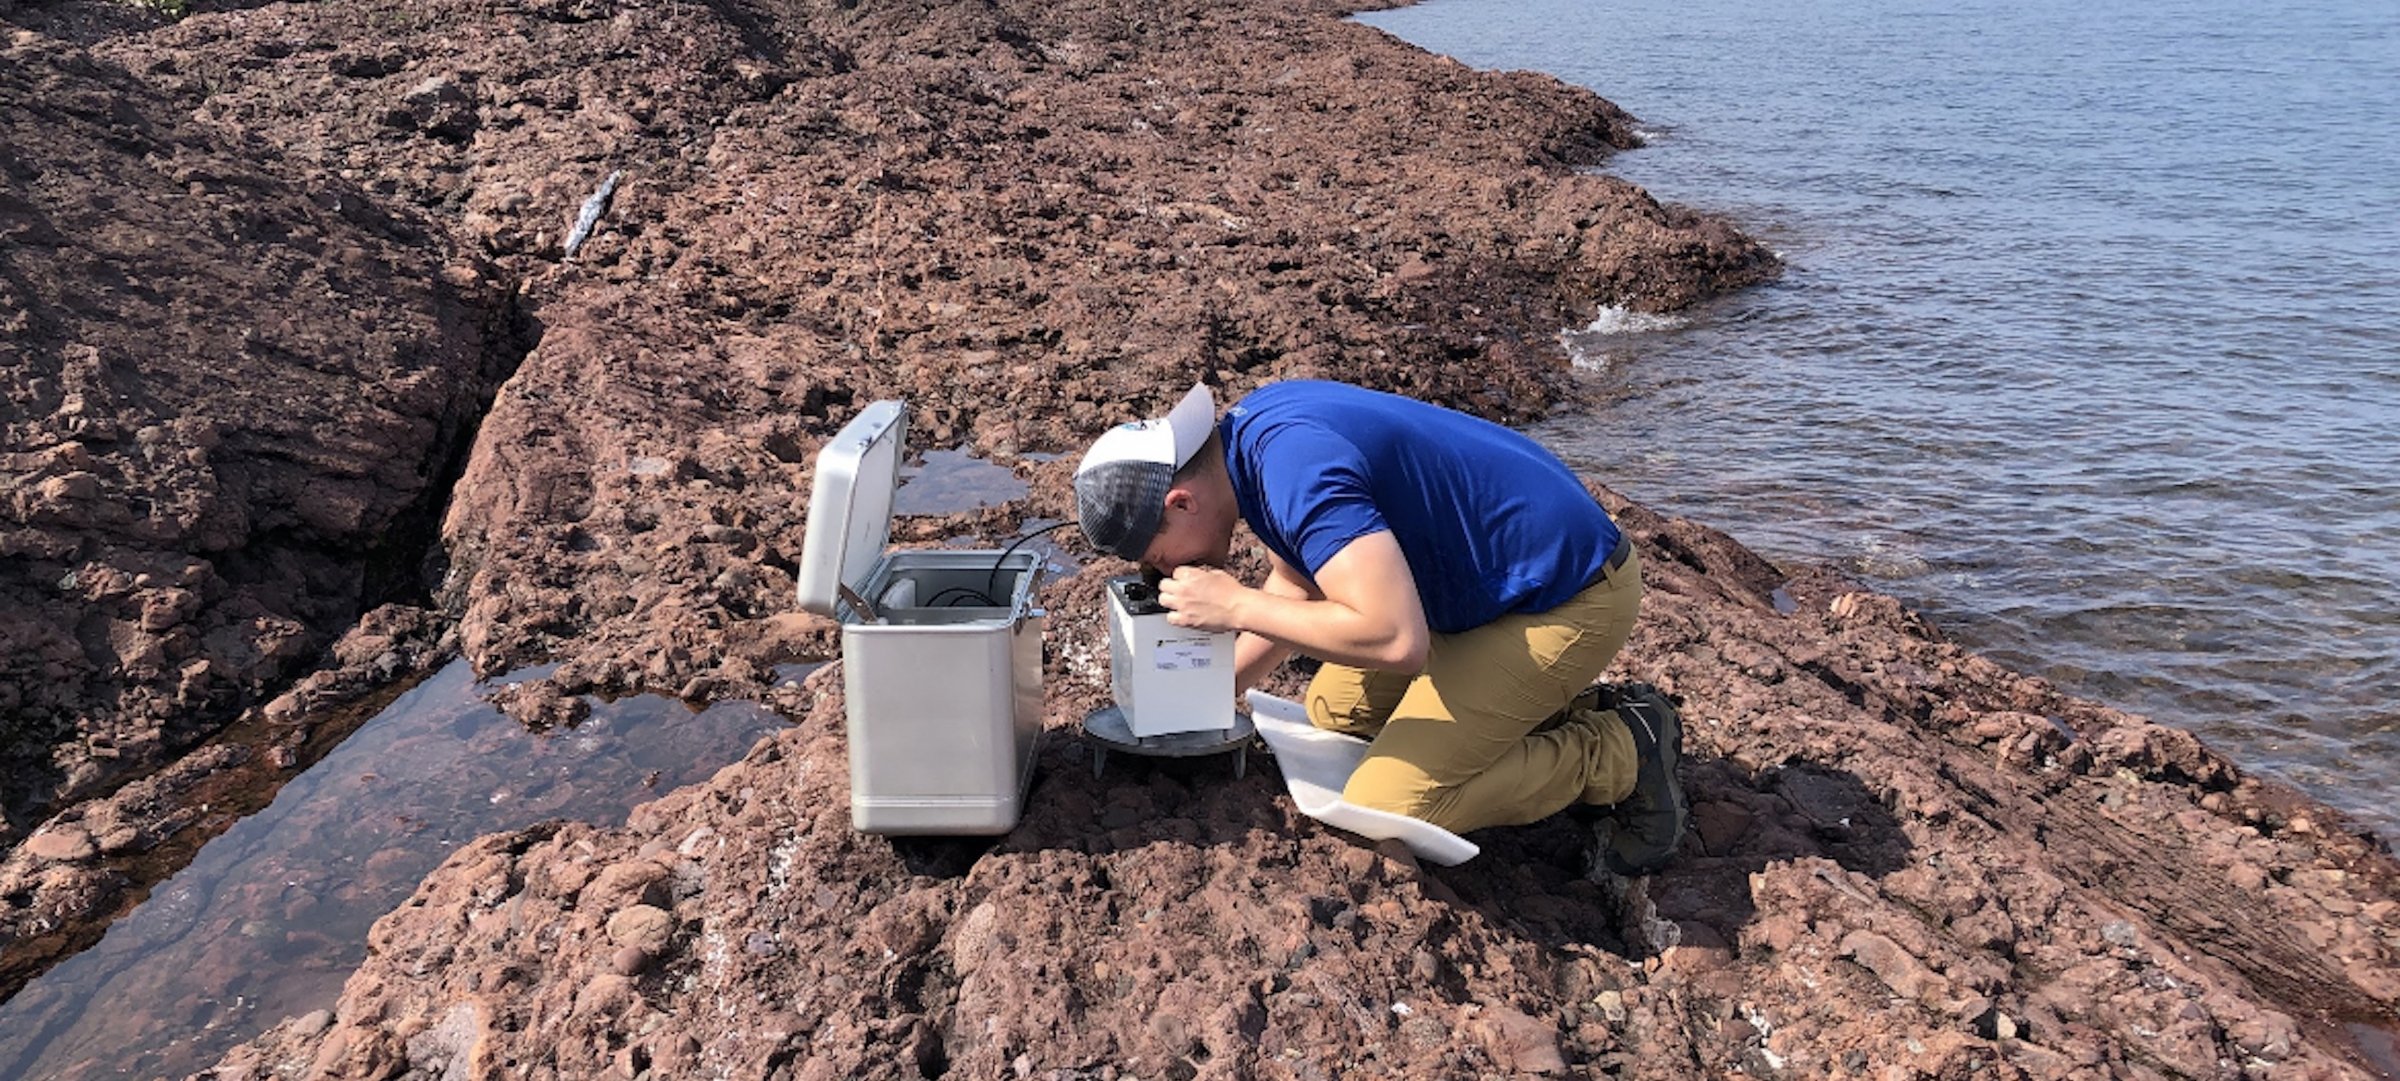 Student researcher on a rockbed in Lake Superior.